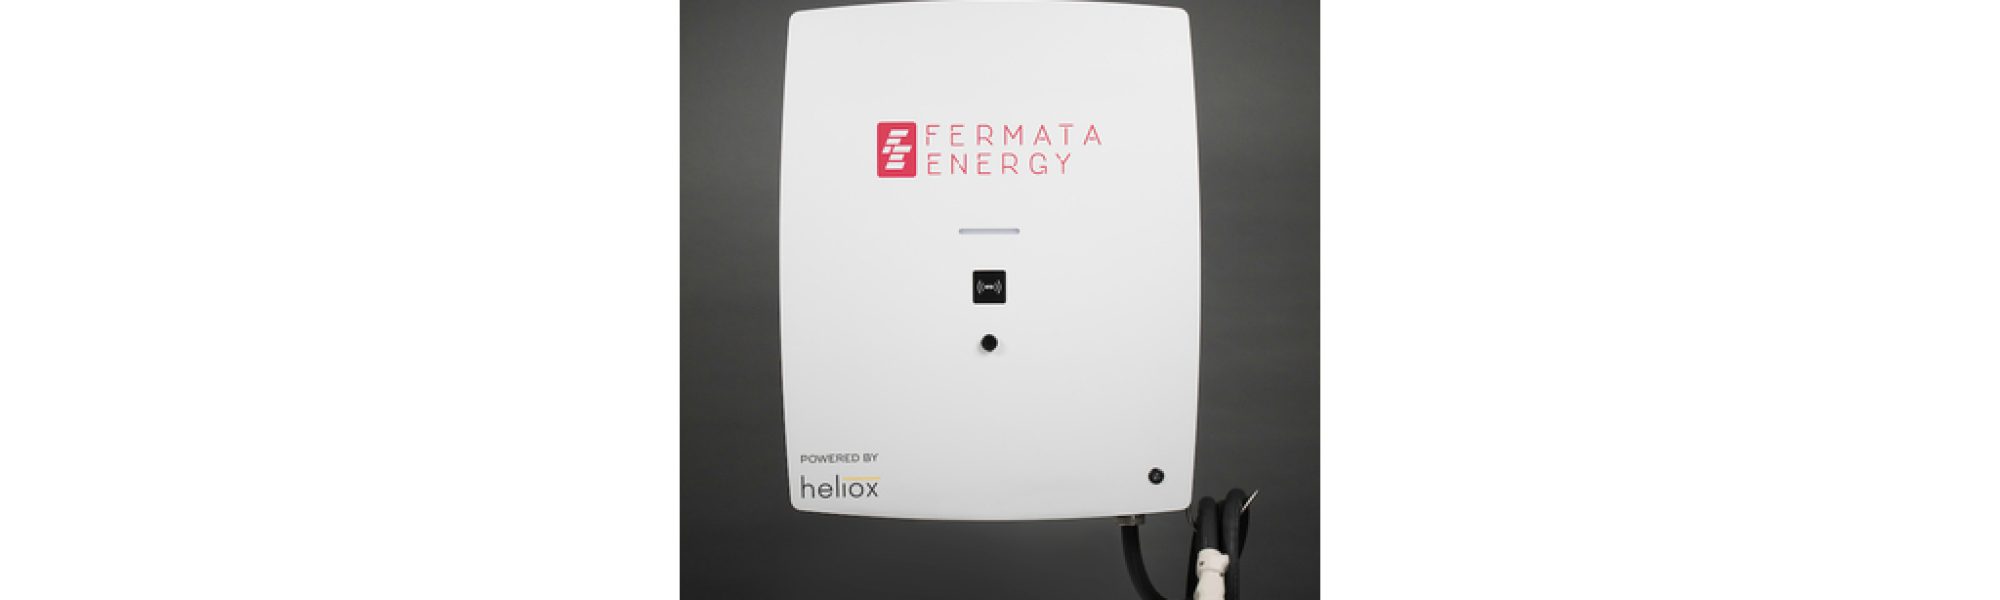 Fermata Energy’s Newest V2X Bidirectional Charger - the FE-20